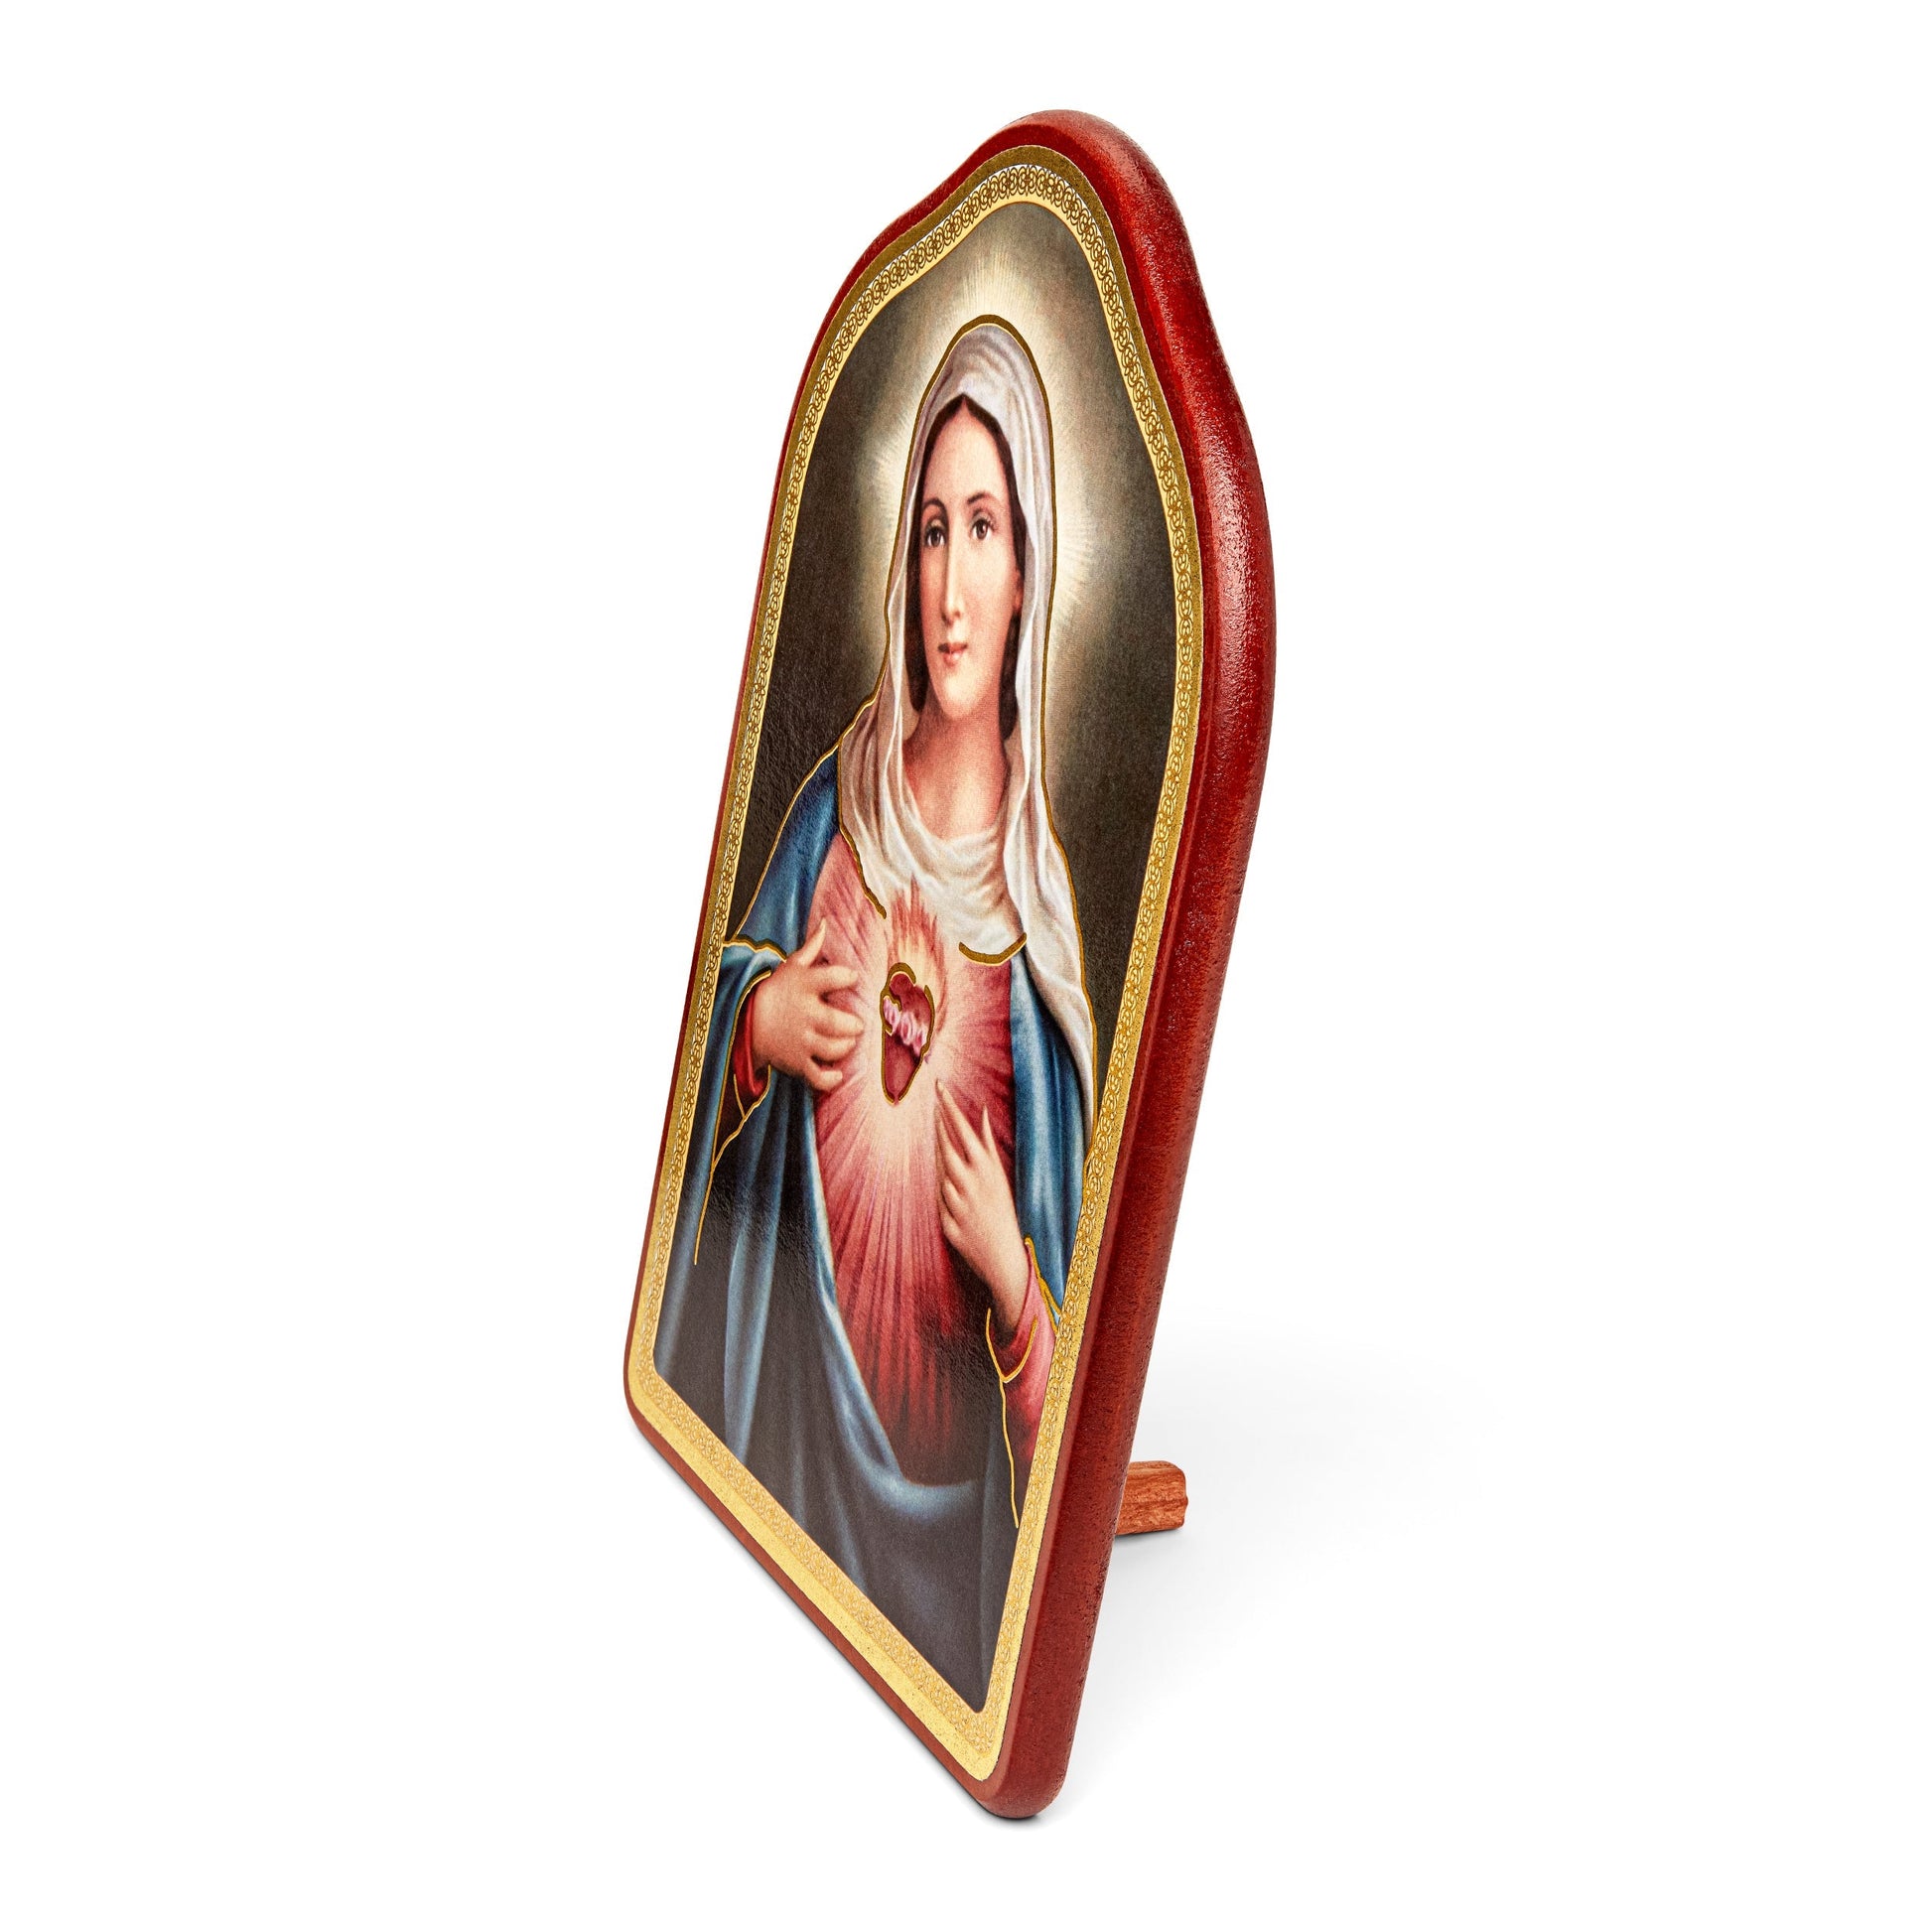 Mondo Cattolico 14.5x21 cm (5.71x8.27 in) Wooden Painting With Red Frame of Immaculate Heart of Mary